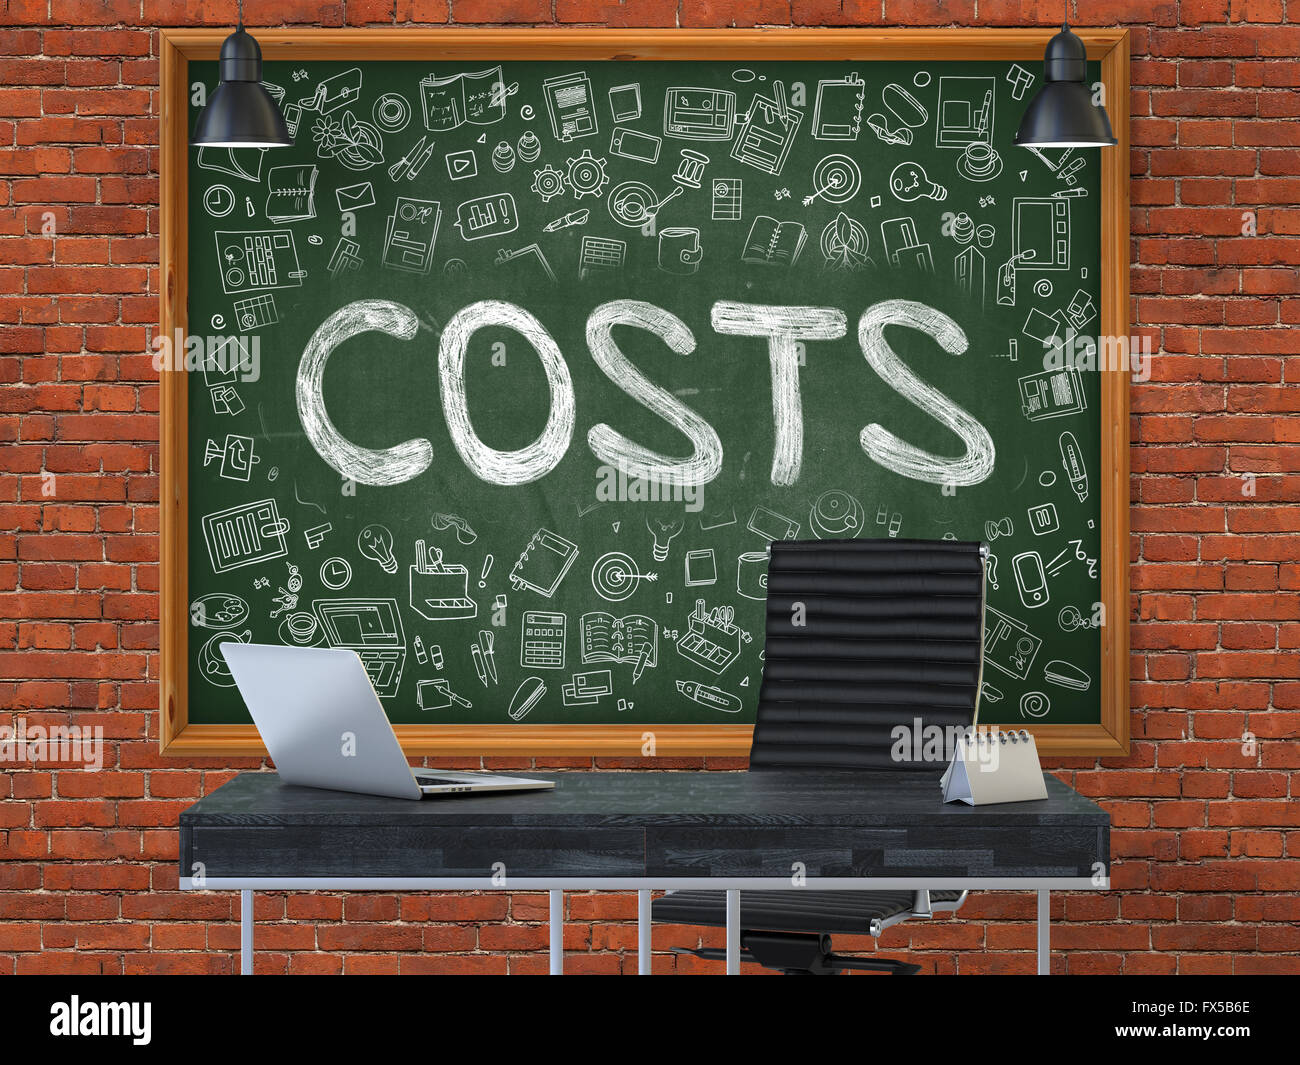 Costs on Chalkboard in the Office. Stock Photo